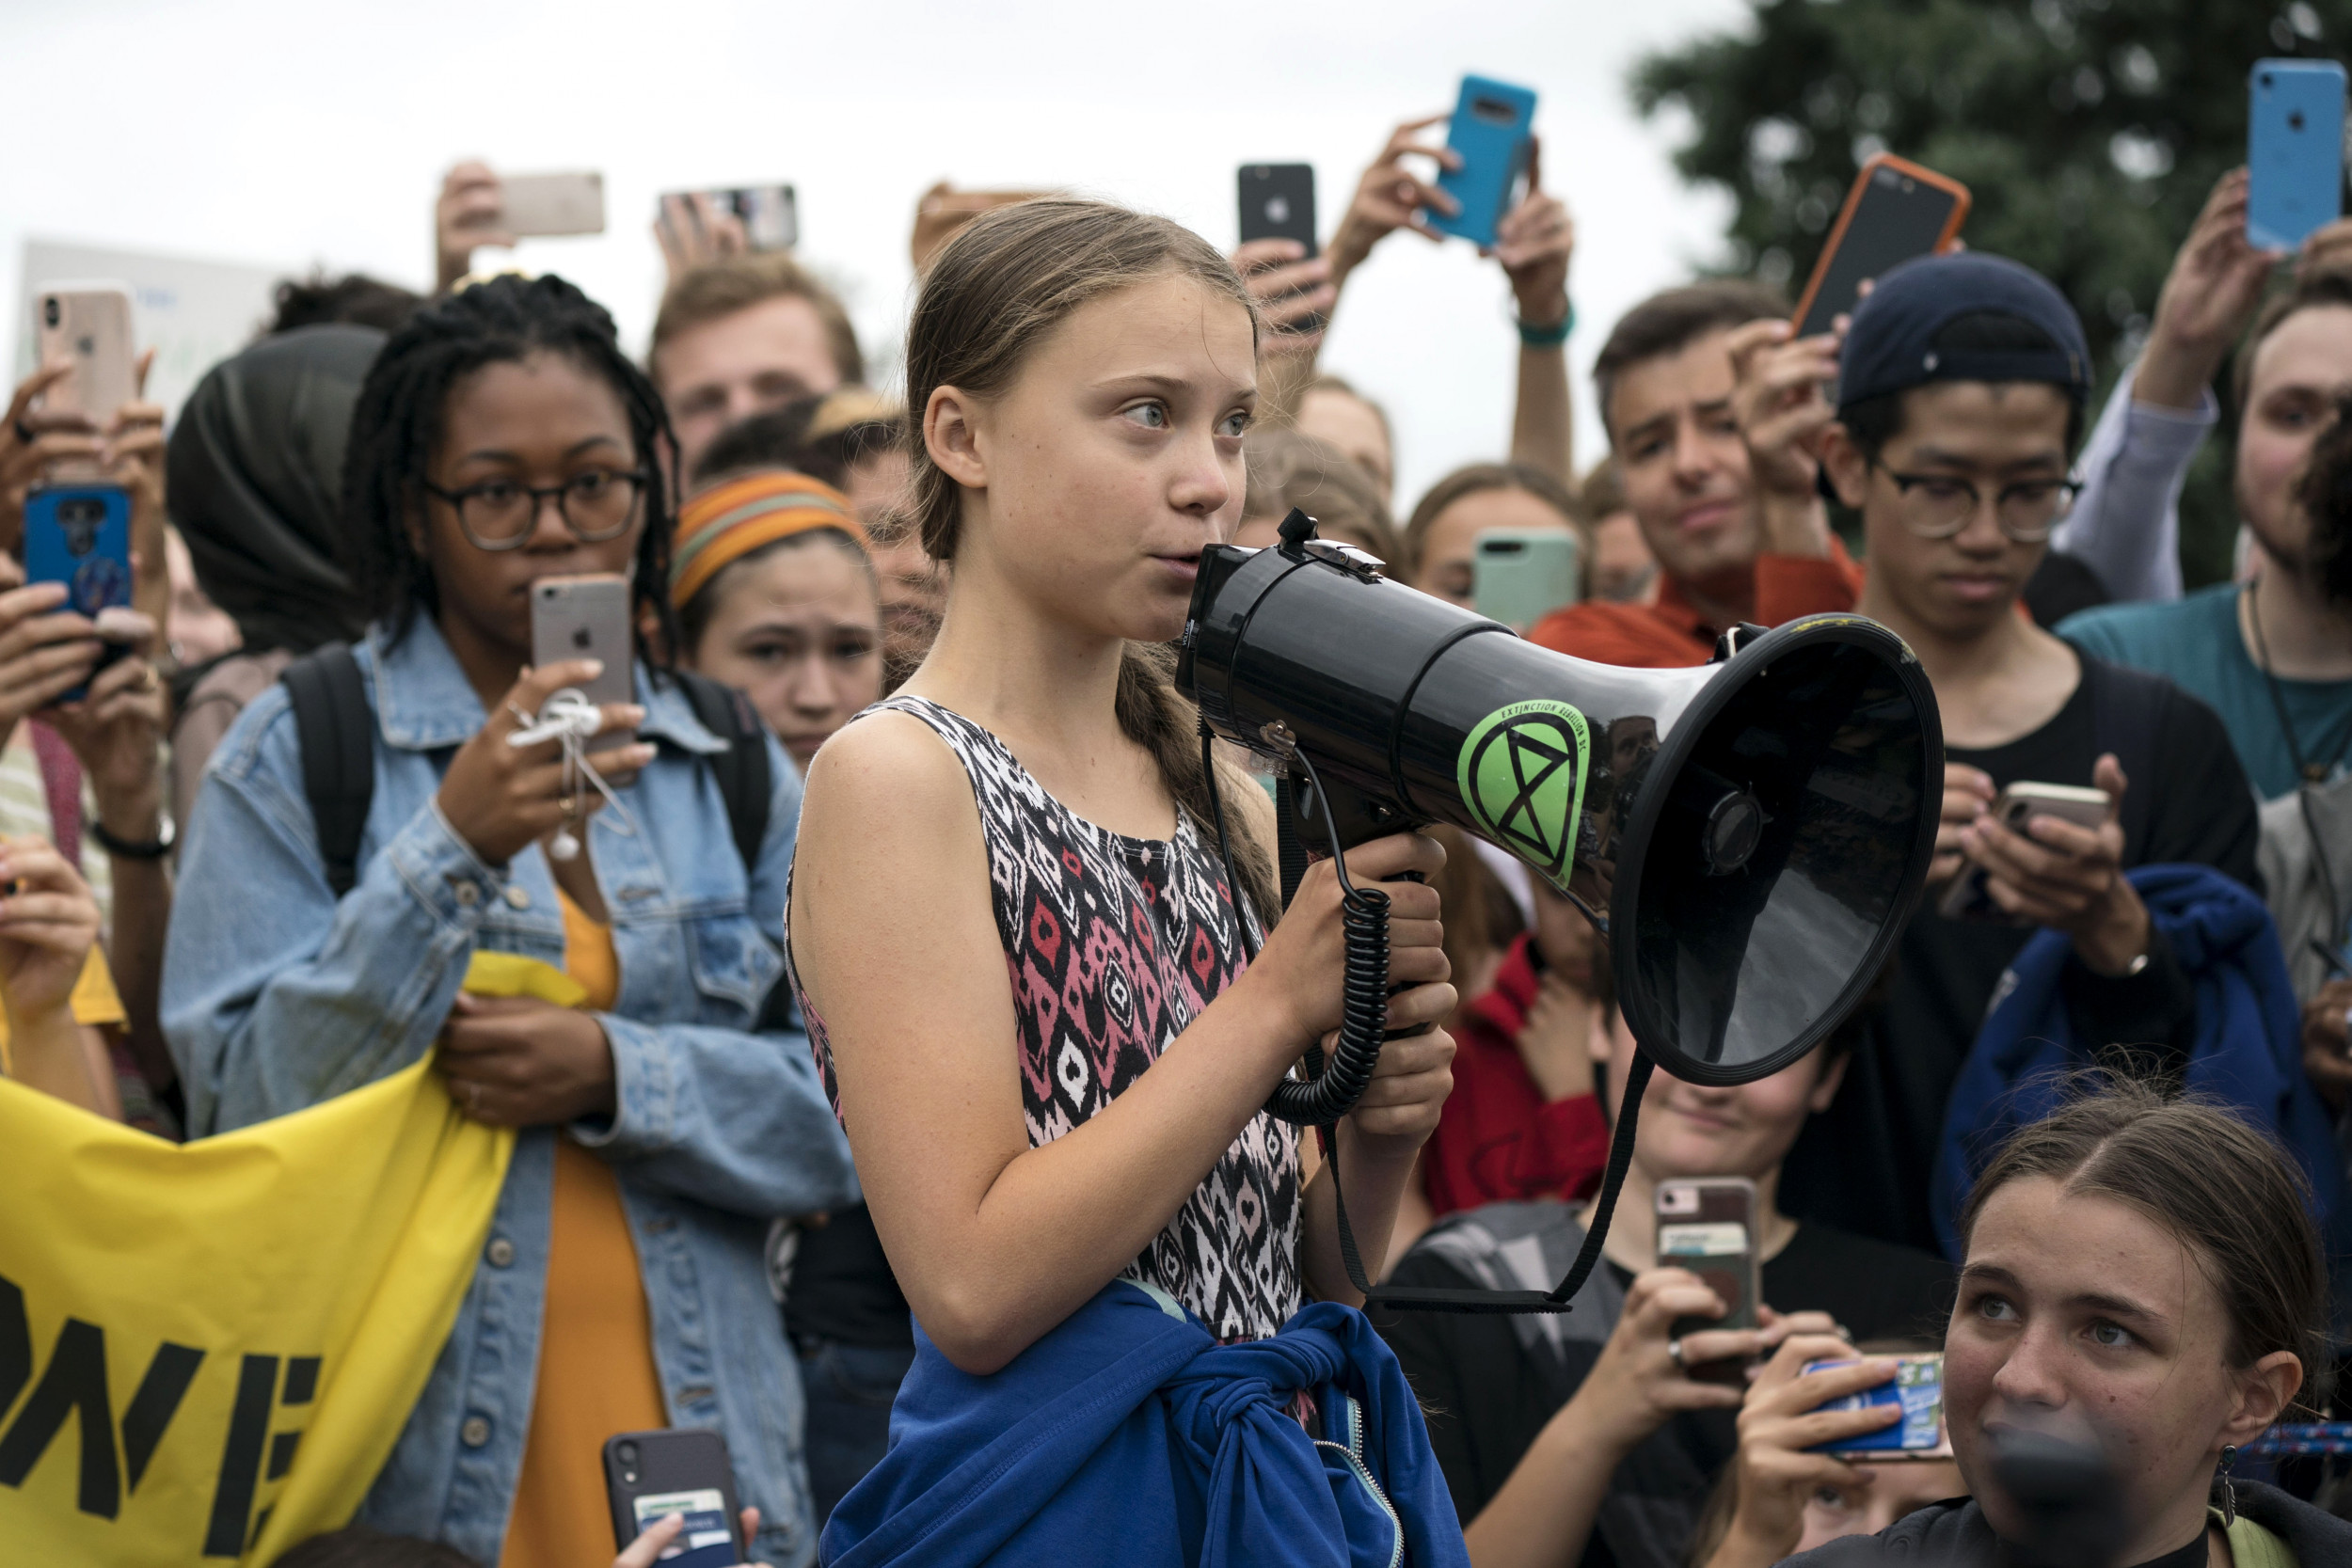 A Greta Thunberg Nobel Peace Prize For Climate Activism Would Have Been At Odds With Norways